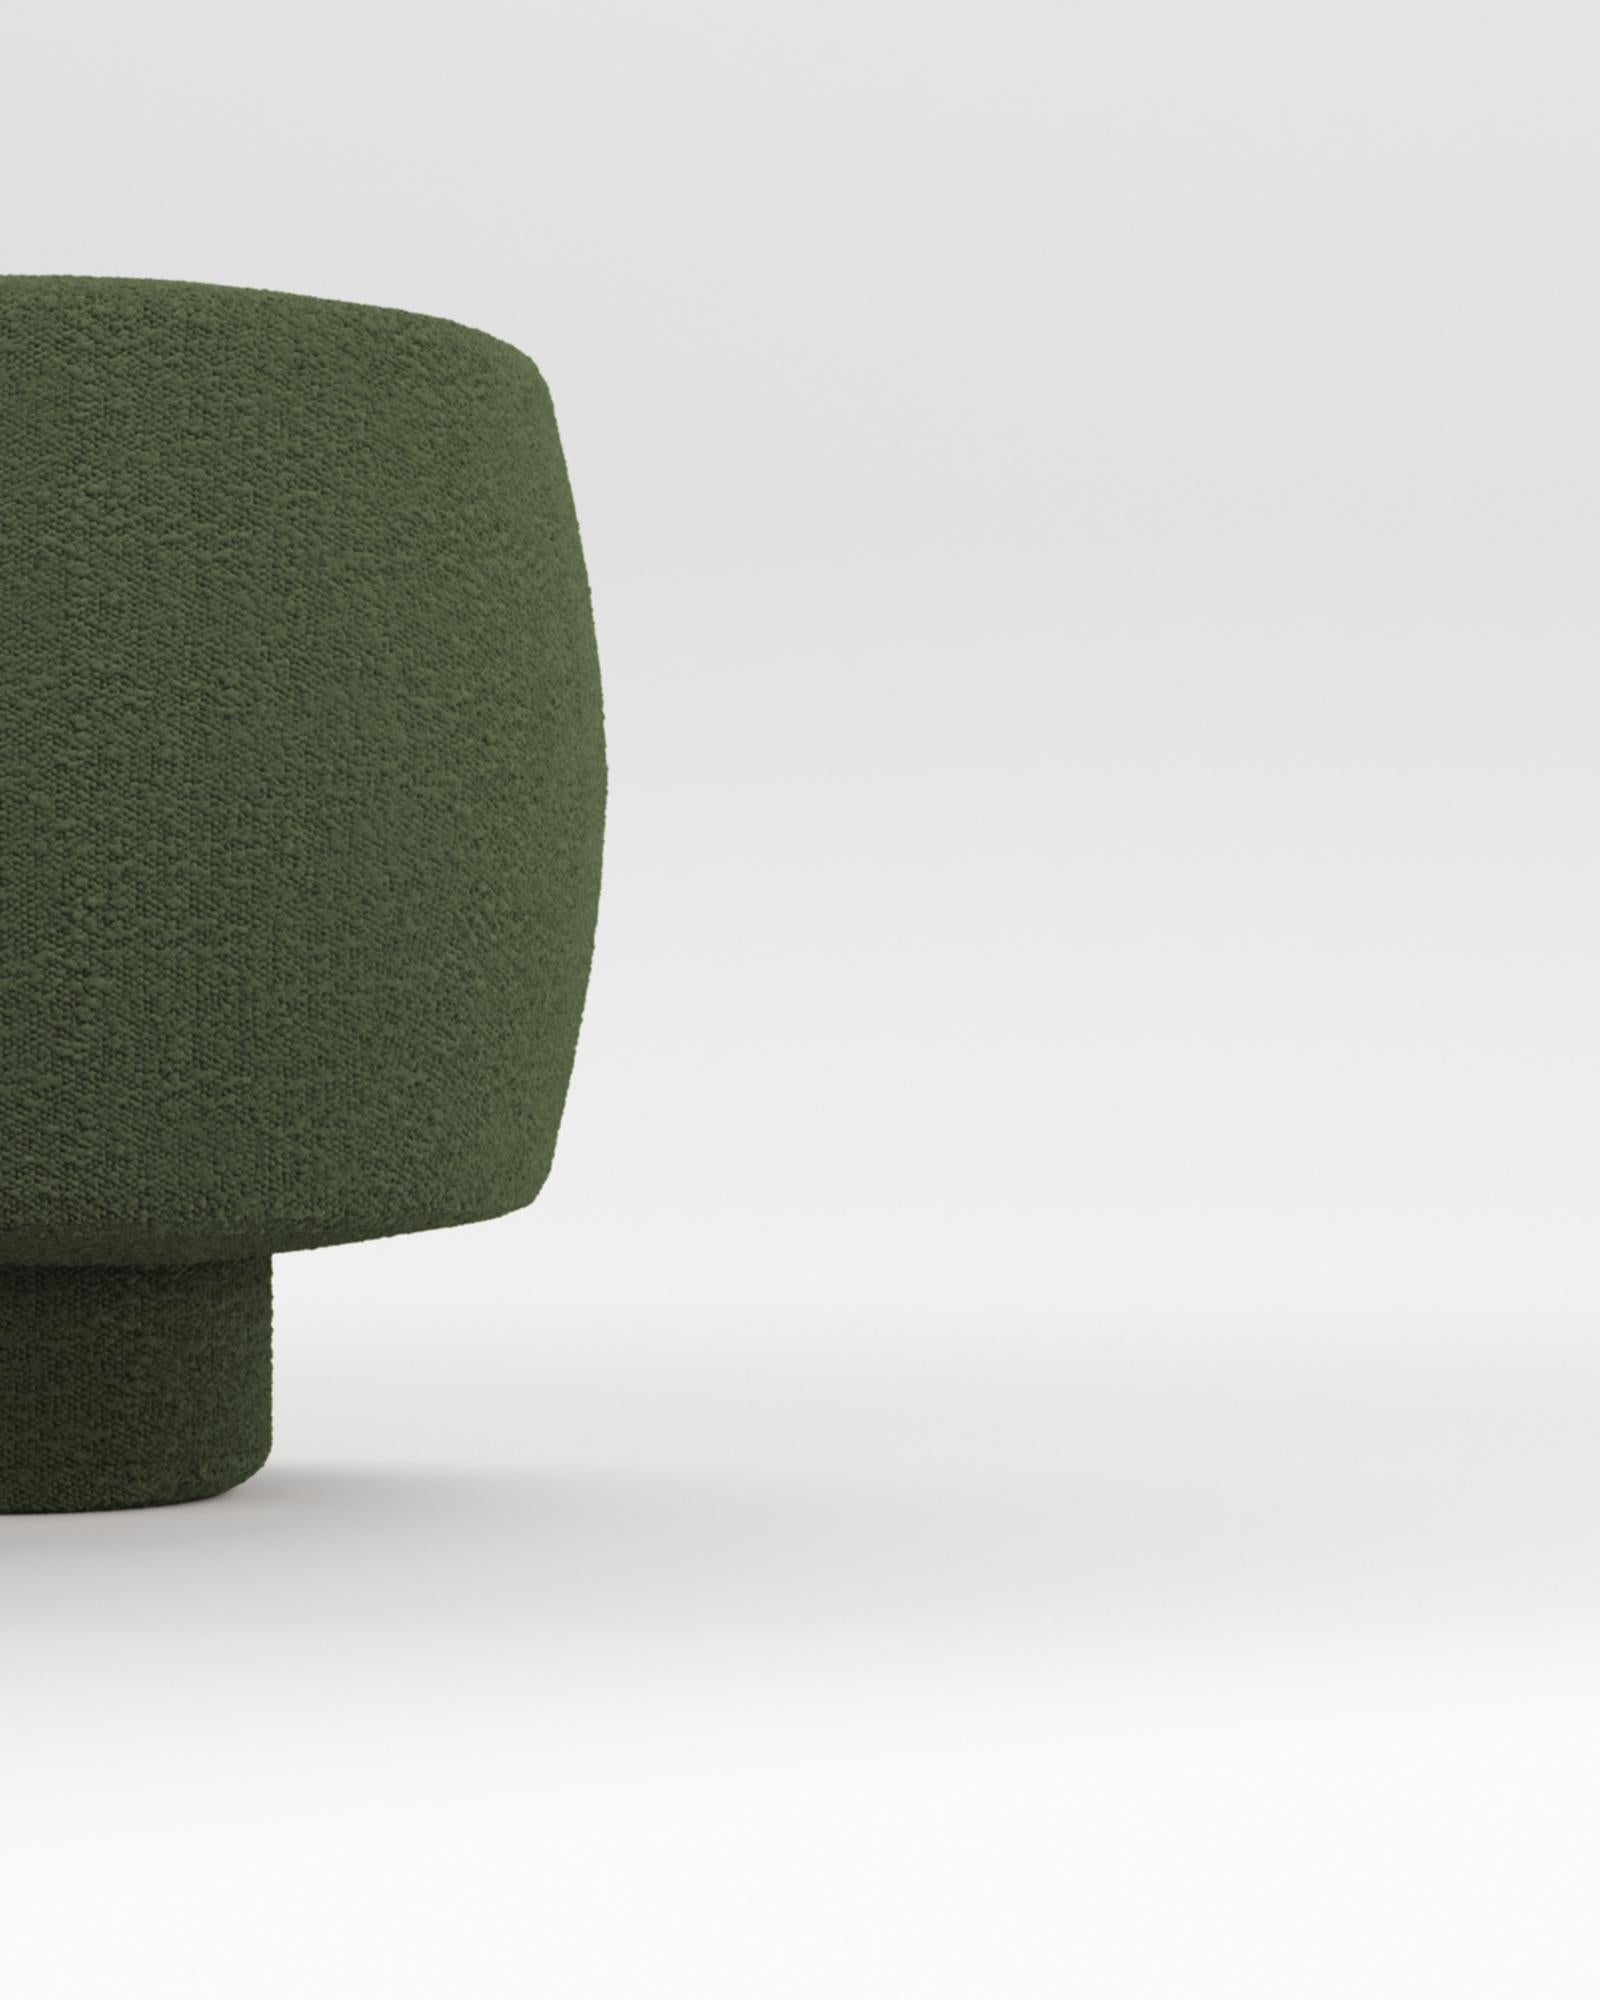 Portuguese Contemporary Hygge Cloud Bench in Green Bouclé by Saccal Design House For Sale